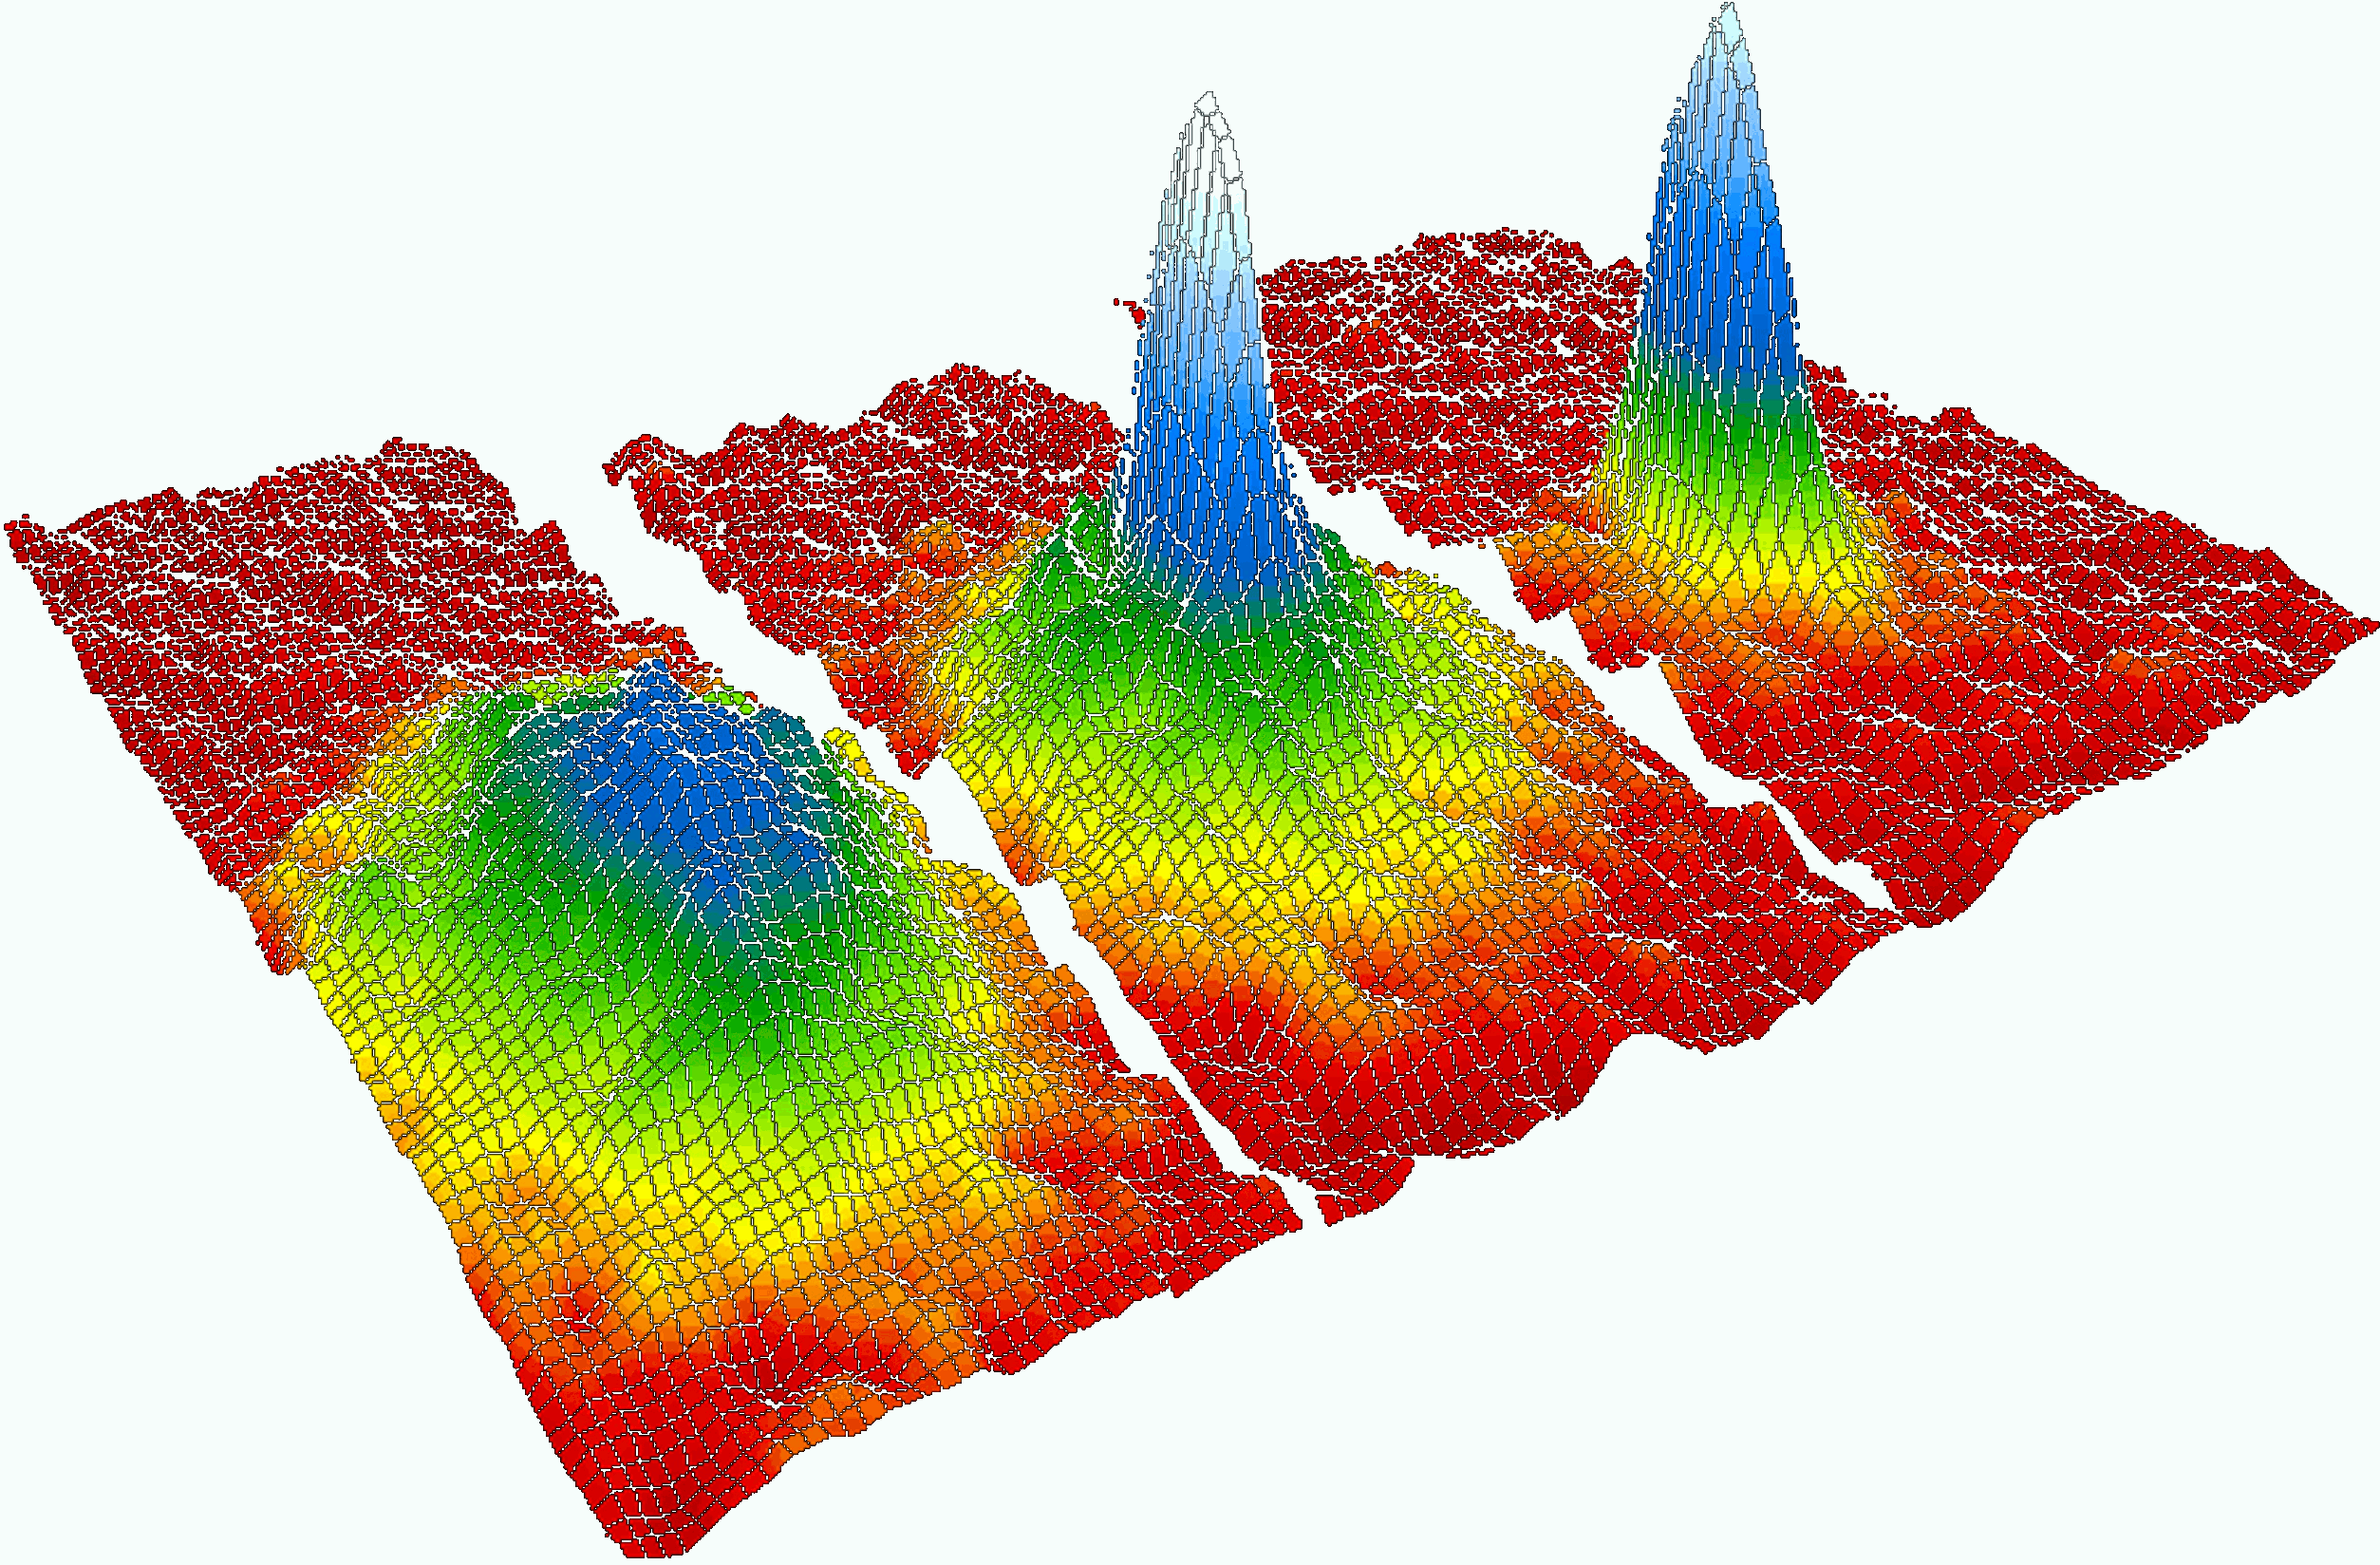 \includegraphics[width=450px]{Bose_Einstein_condensate.png}